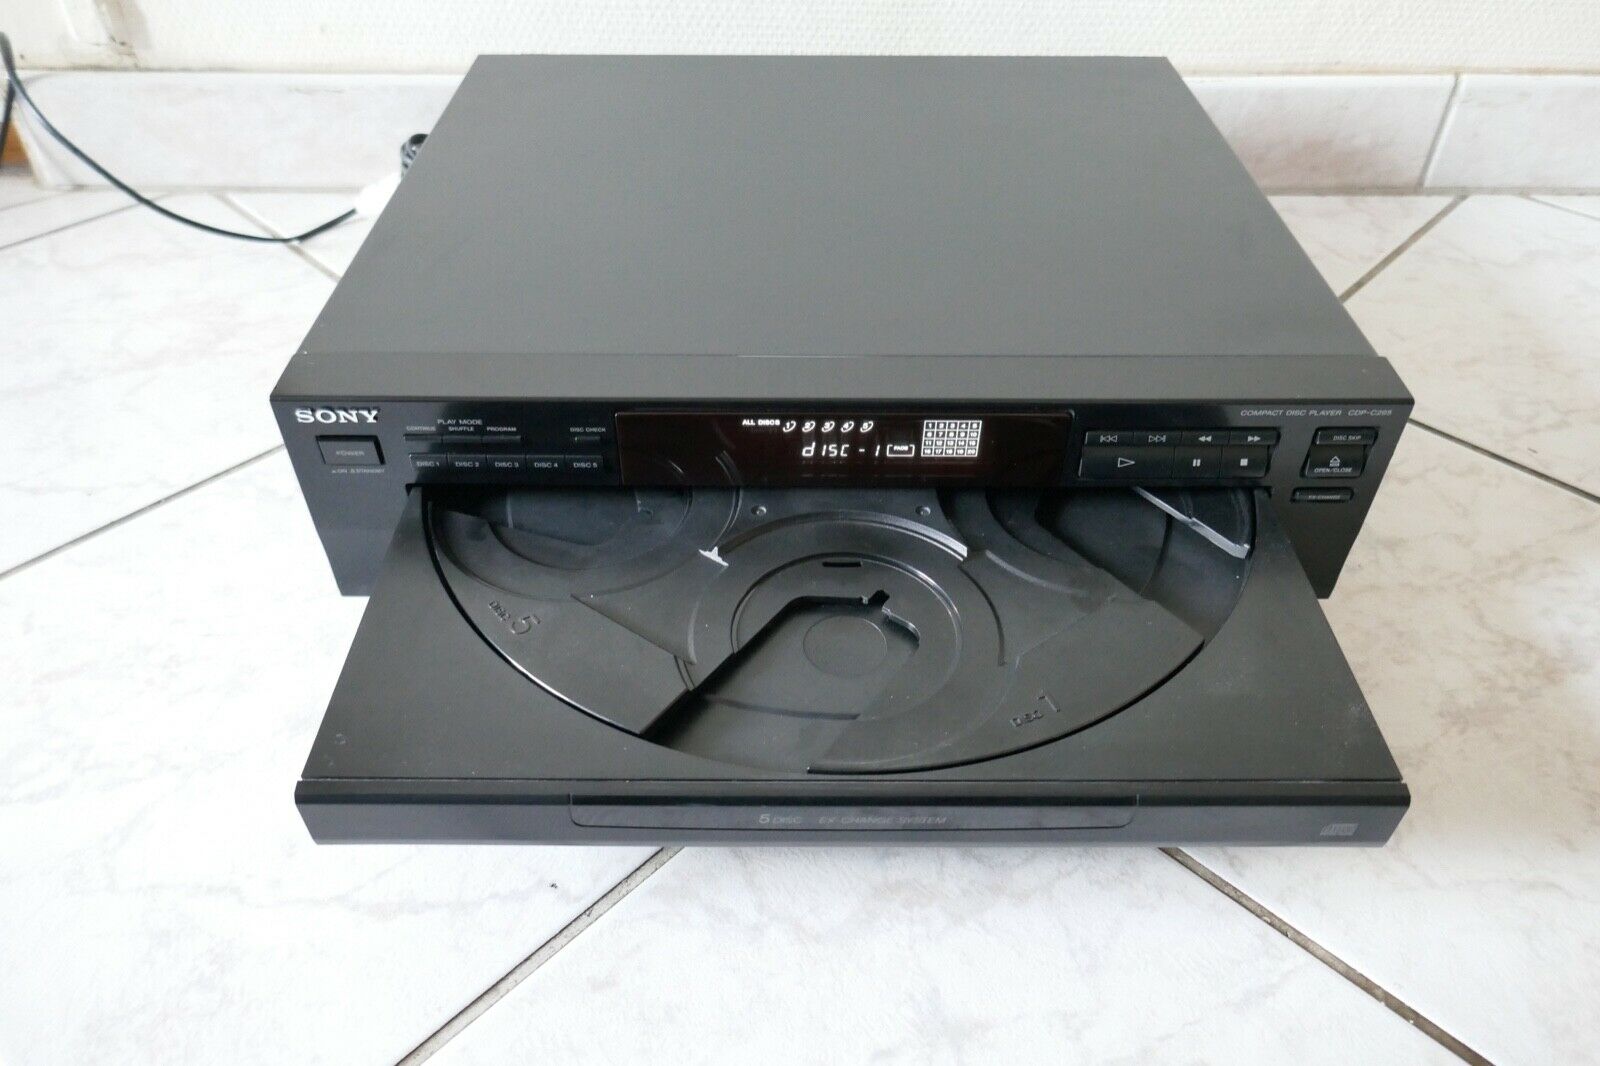 lecteur cd compact disc player sony CDP-C265 vintage occasion